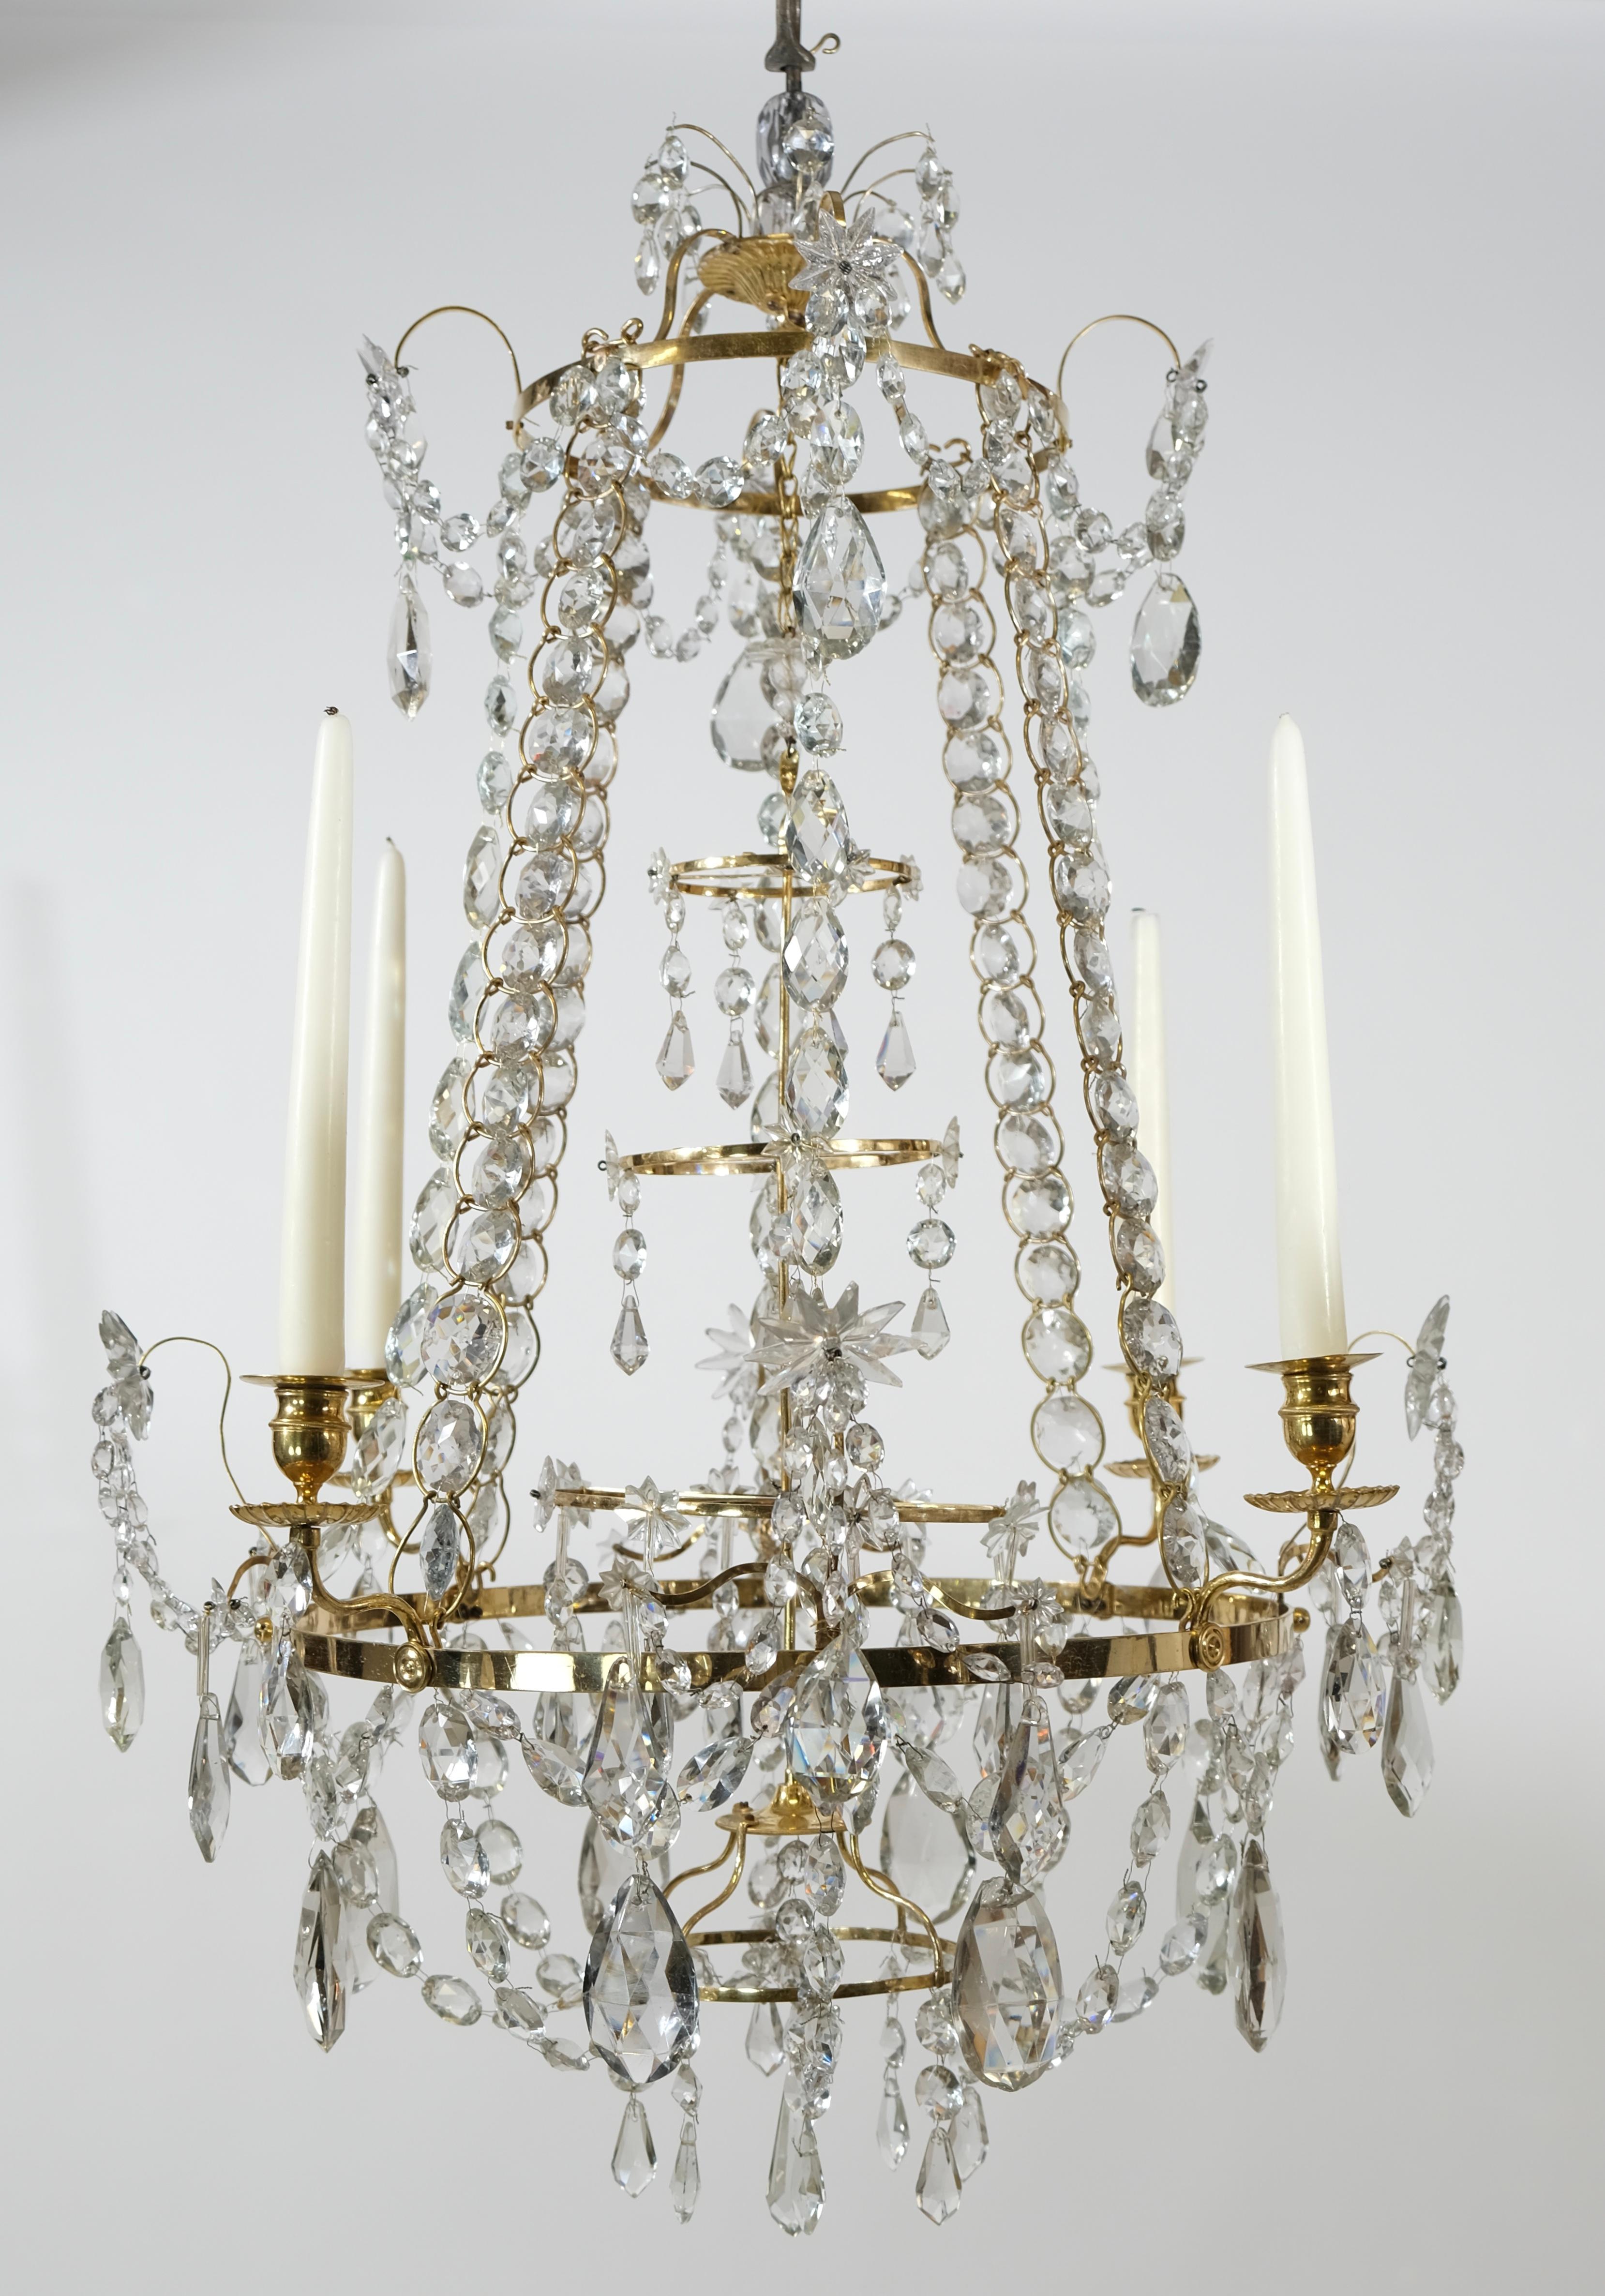 This is a unique and important chandelier. It is dated 1st of December 1791 and signed by Olof Westerberg, the best chandelier maker in Stockholm at the time.
There are very few signed chandeliers and even fewer that are dated. That together with